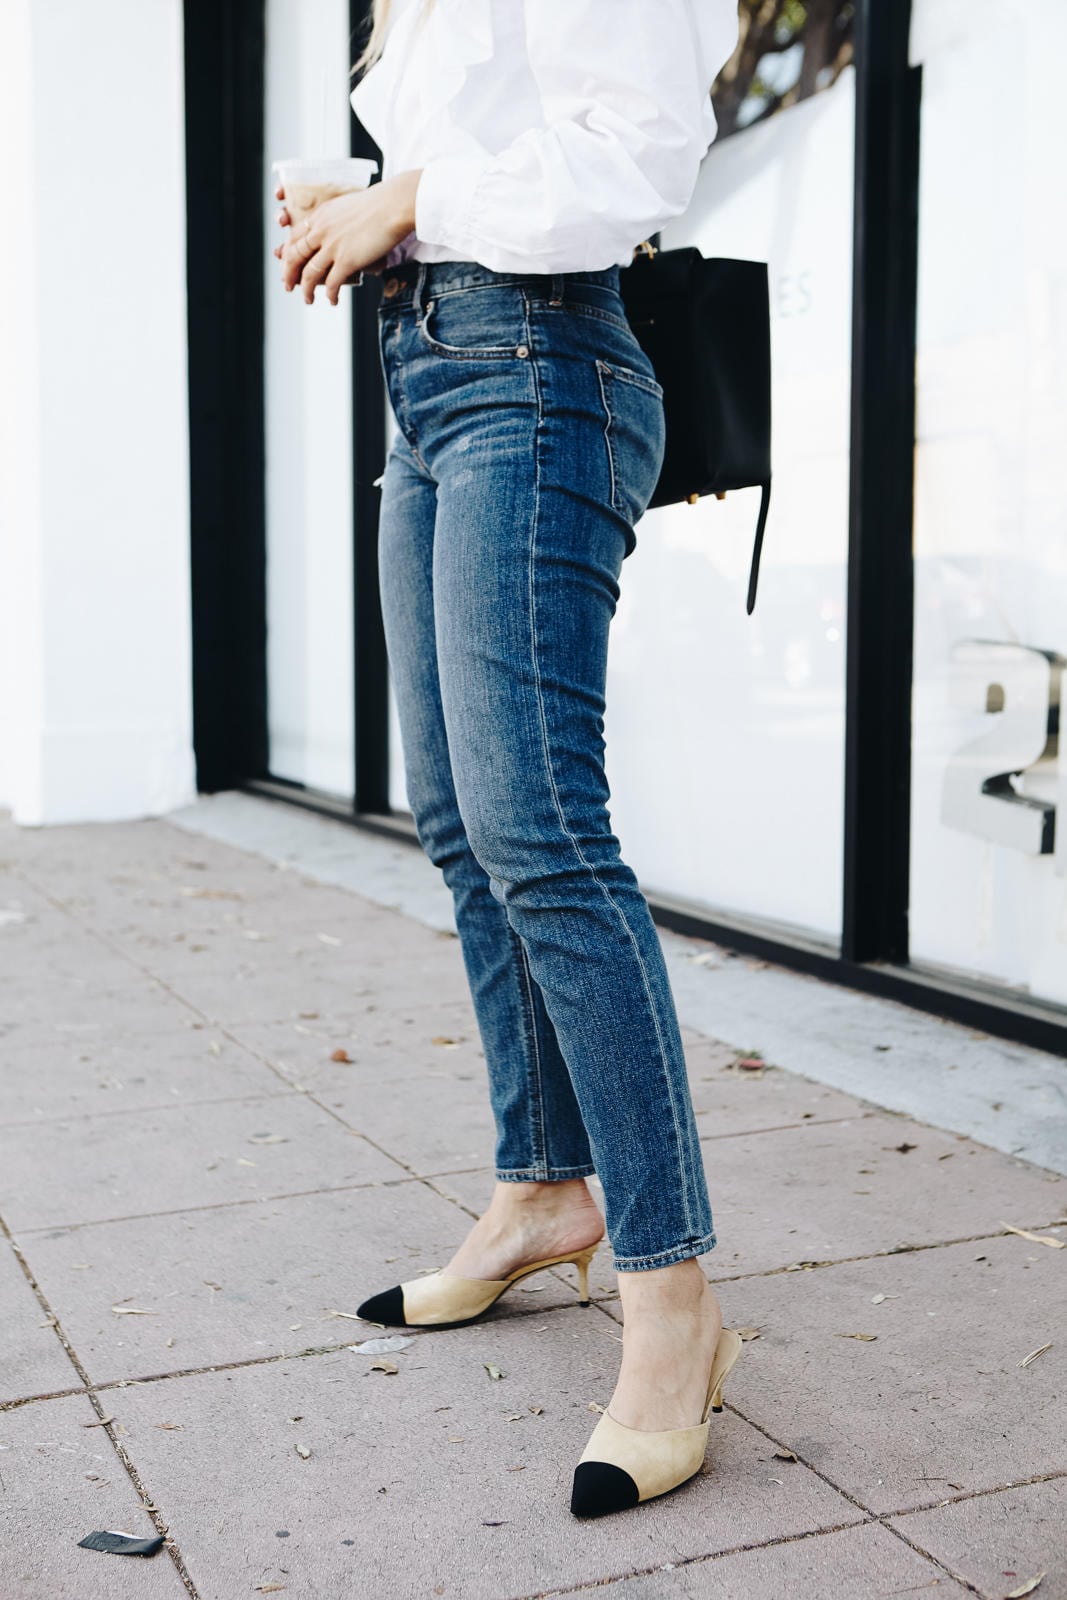 Express Ruffle front long sleeve top, high waisted skinny jeans, chanel mules |The Girl From Panama